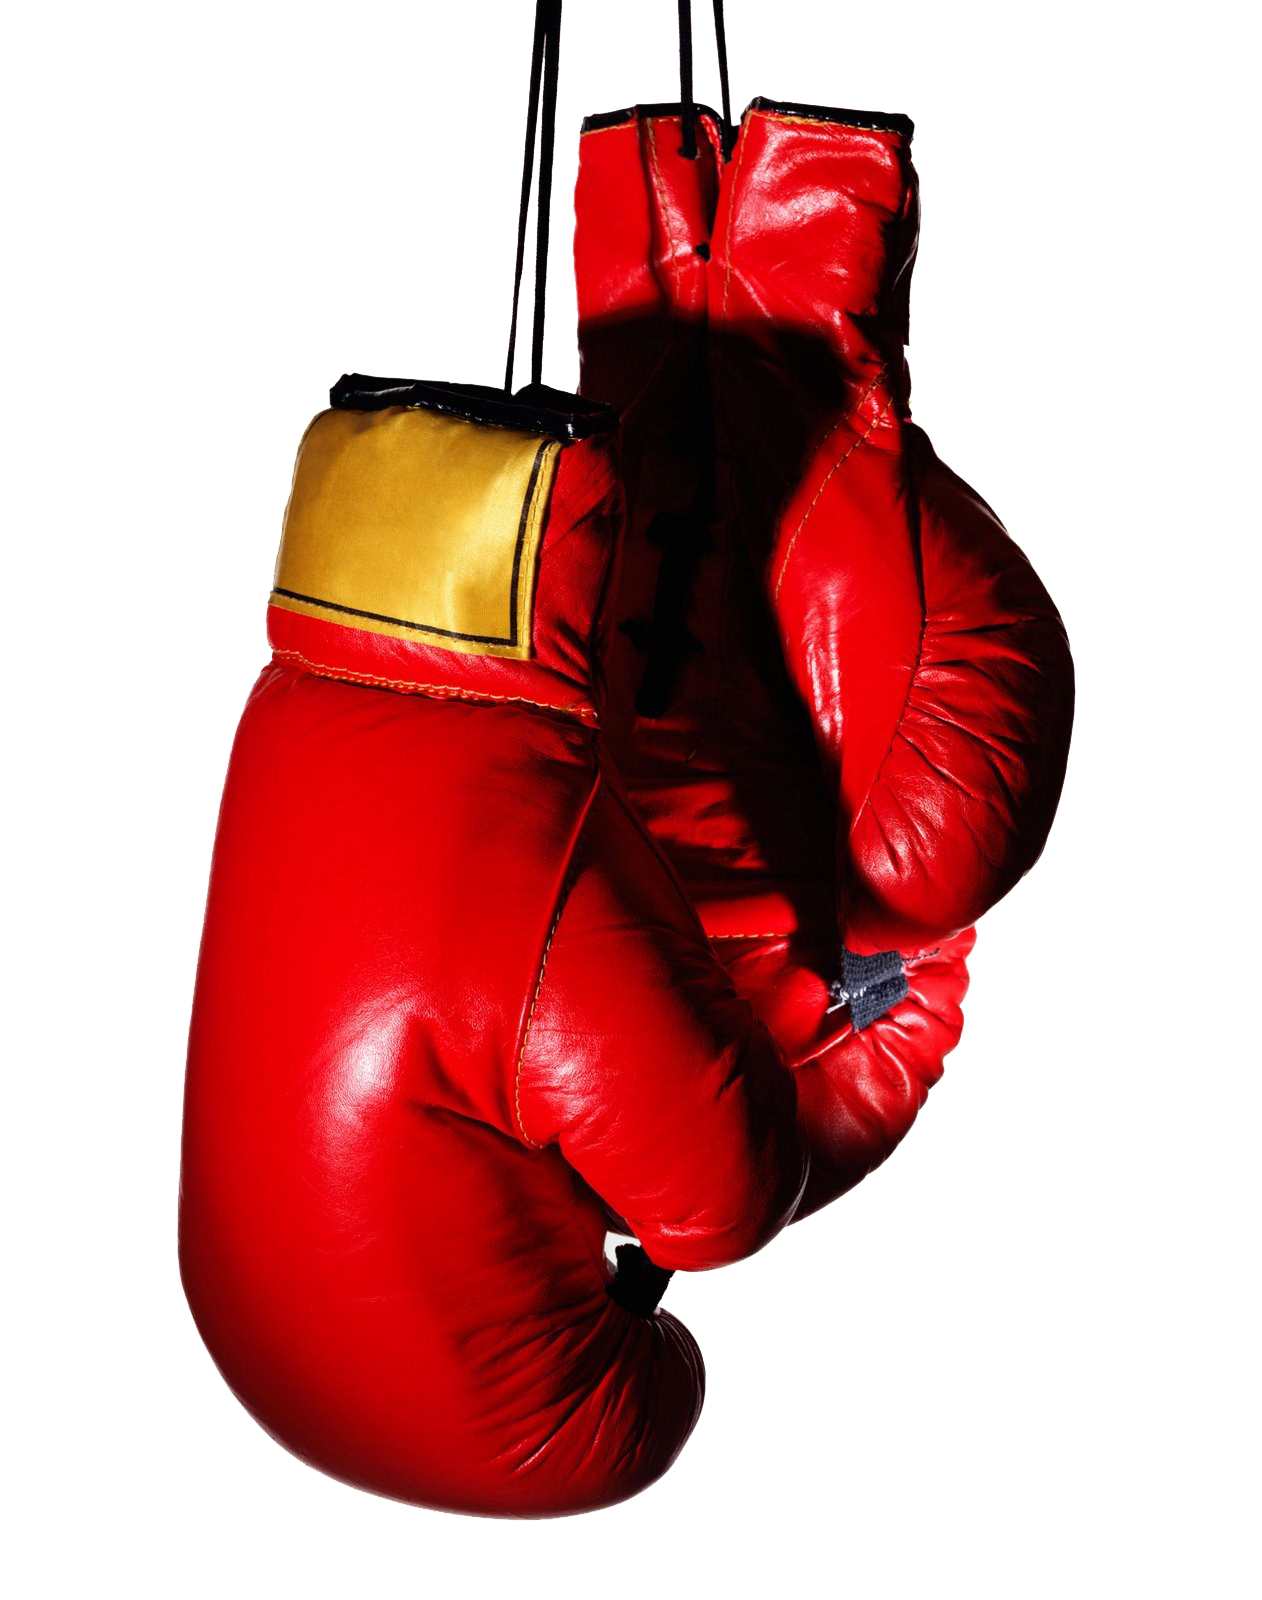 Boxing Gloves Png Transparent Image - Boxing, Transparent background PNG HD thumbnail